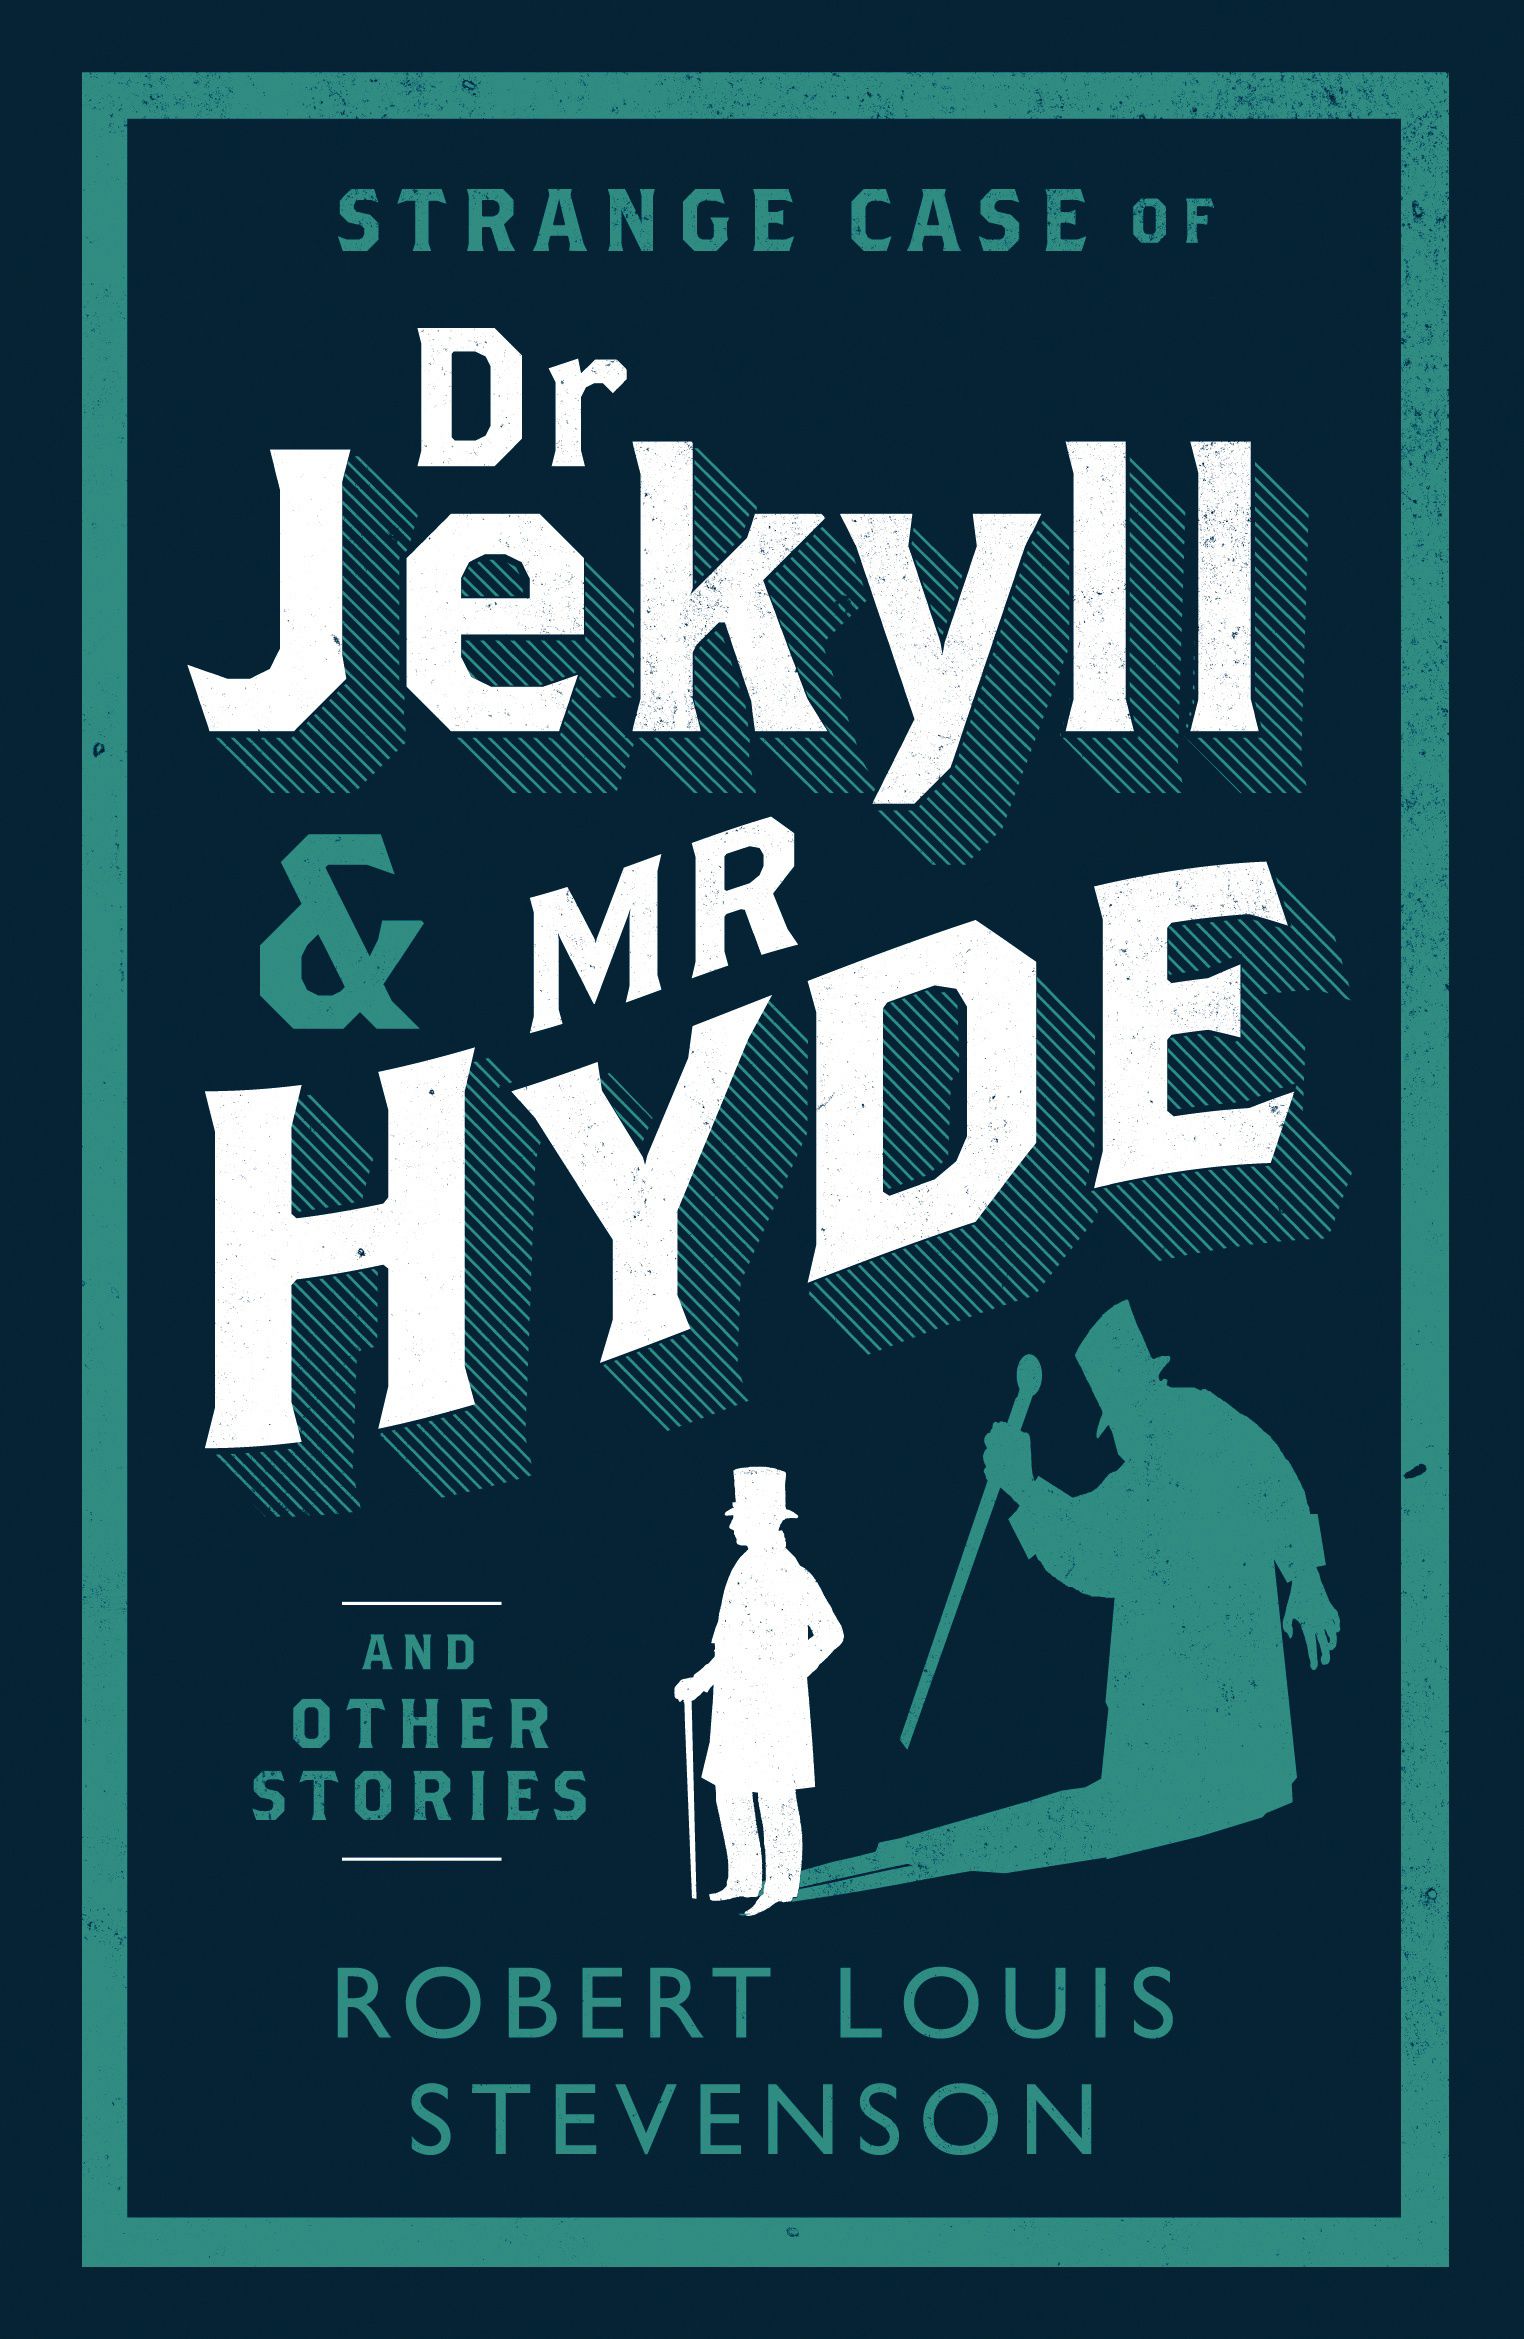 Book cover of dr jekyll and mr hyde